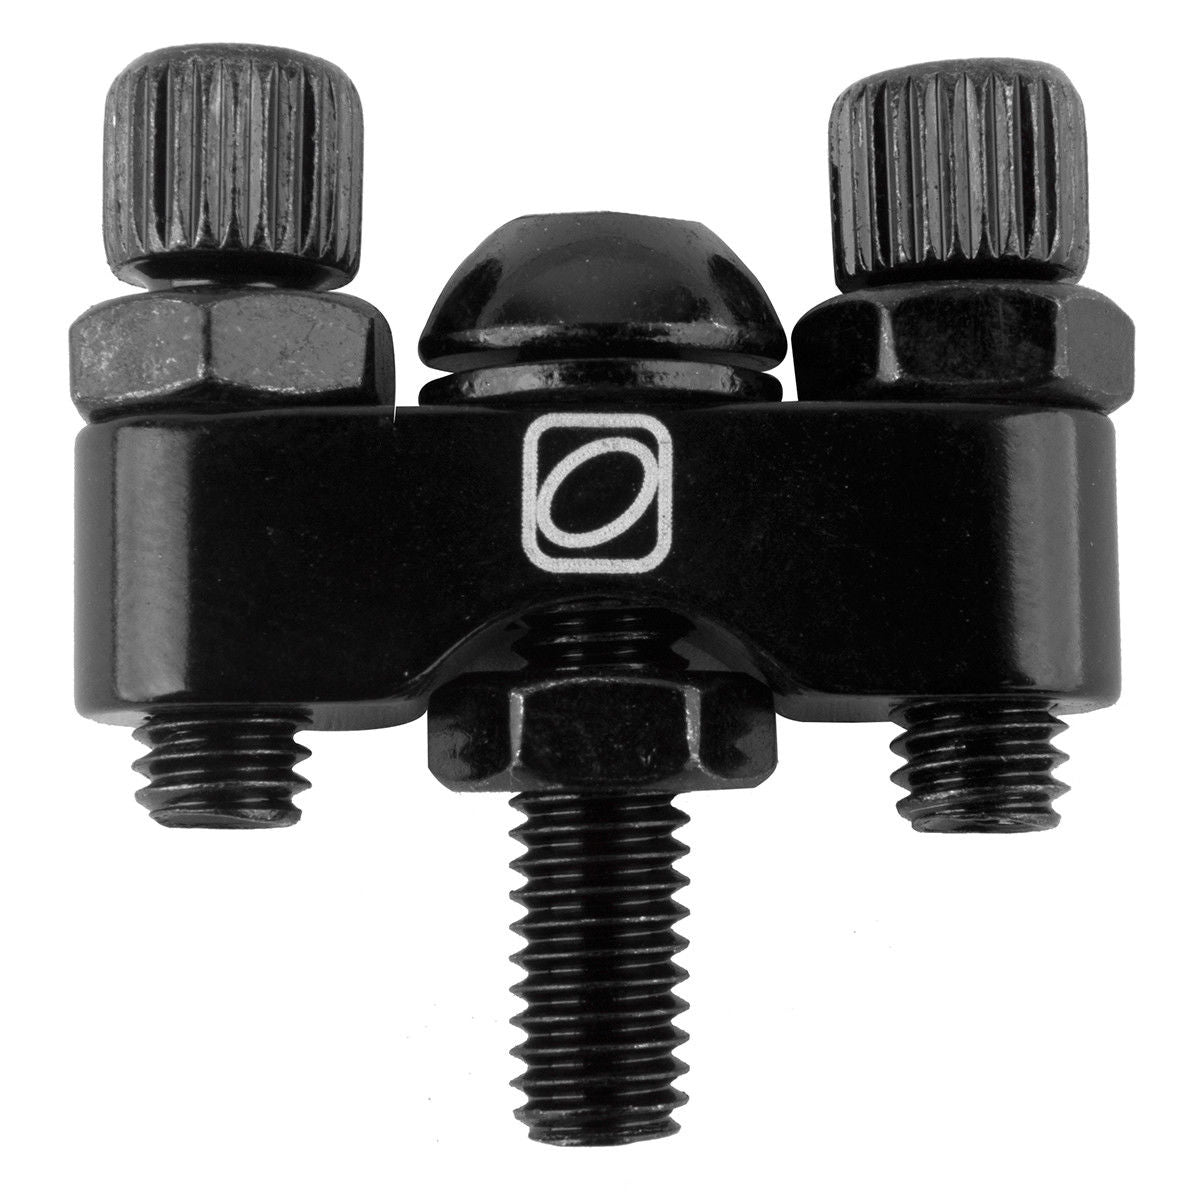 Odyssey London Mod - Dual brake cable adapter f/ lower gyro cable